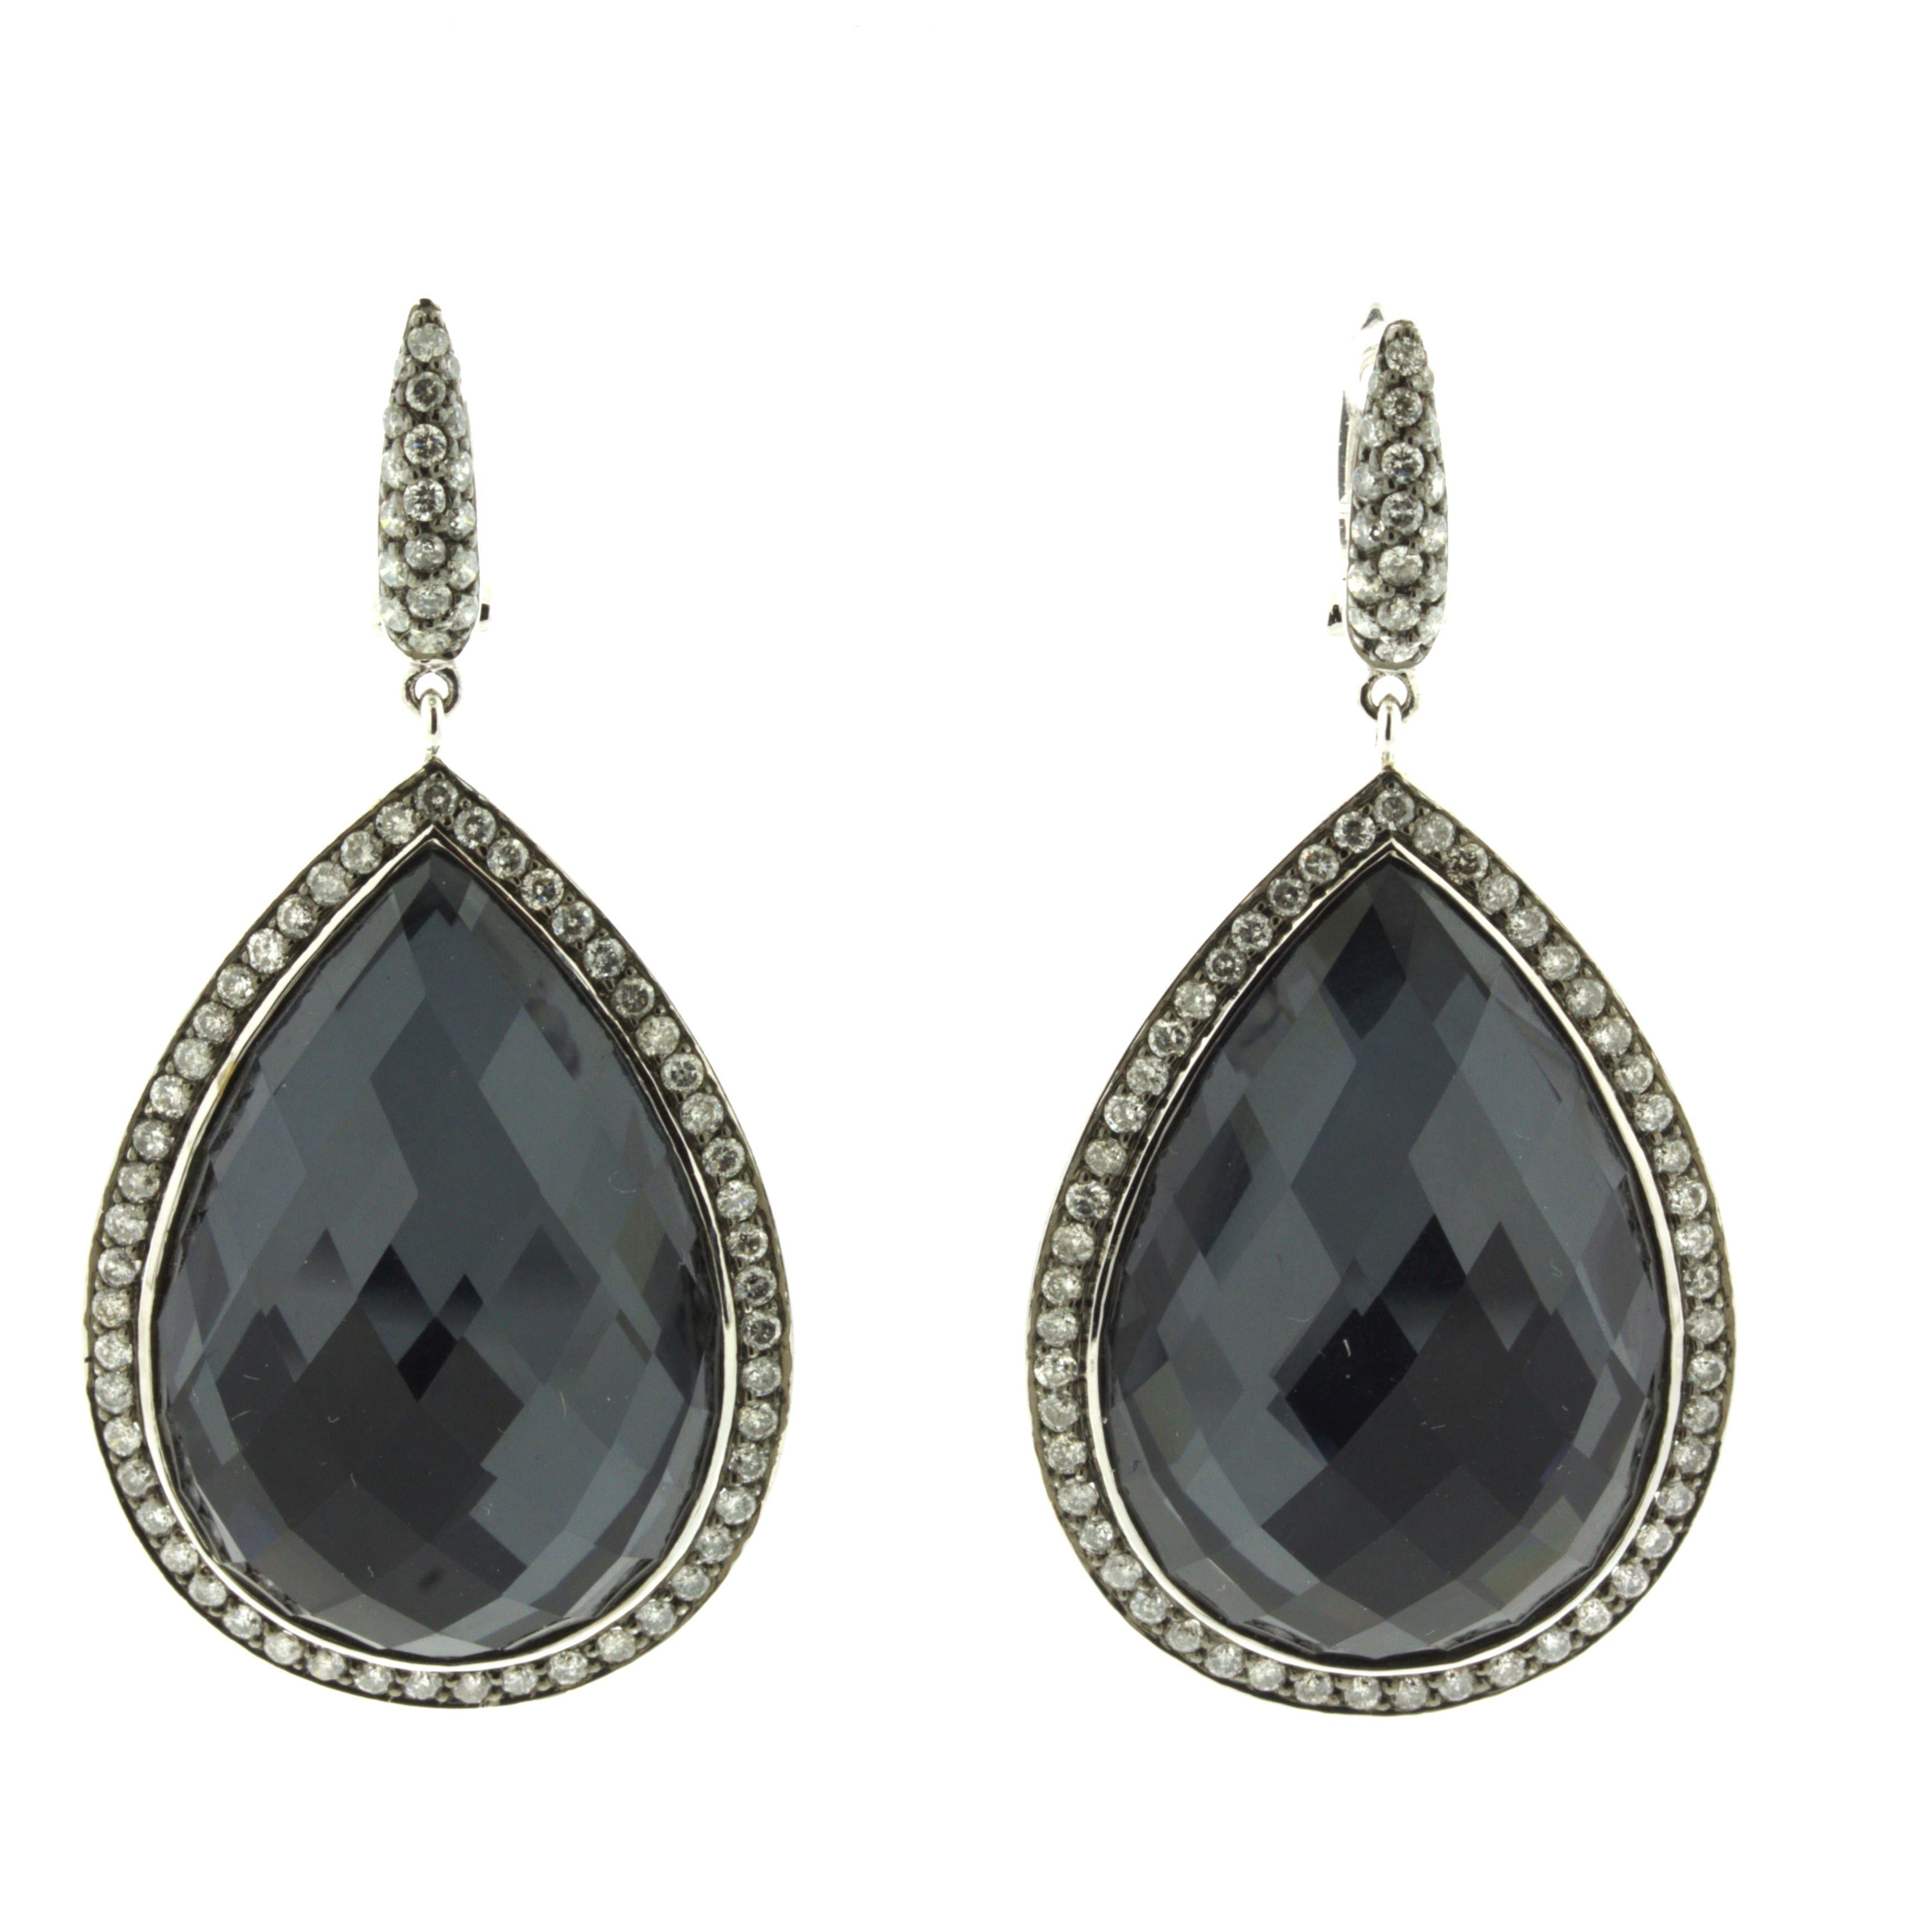 A modern and unique pair of drop earrings made in 18k white gold. They feature rose-cut smoky quartz with a thin slice of hematite set under each earring. This gives the quartz a deeper rich metallic color that shines bright in the light. They weigh